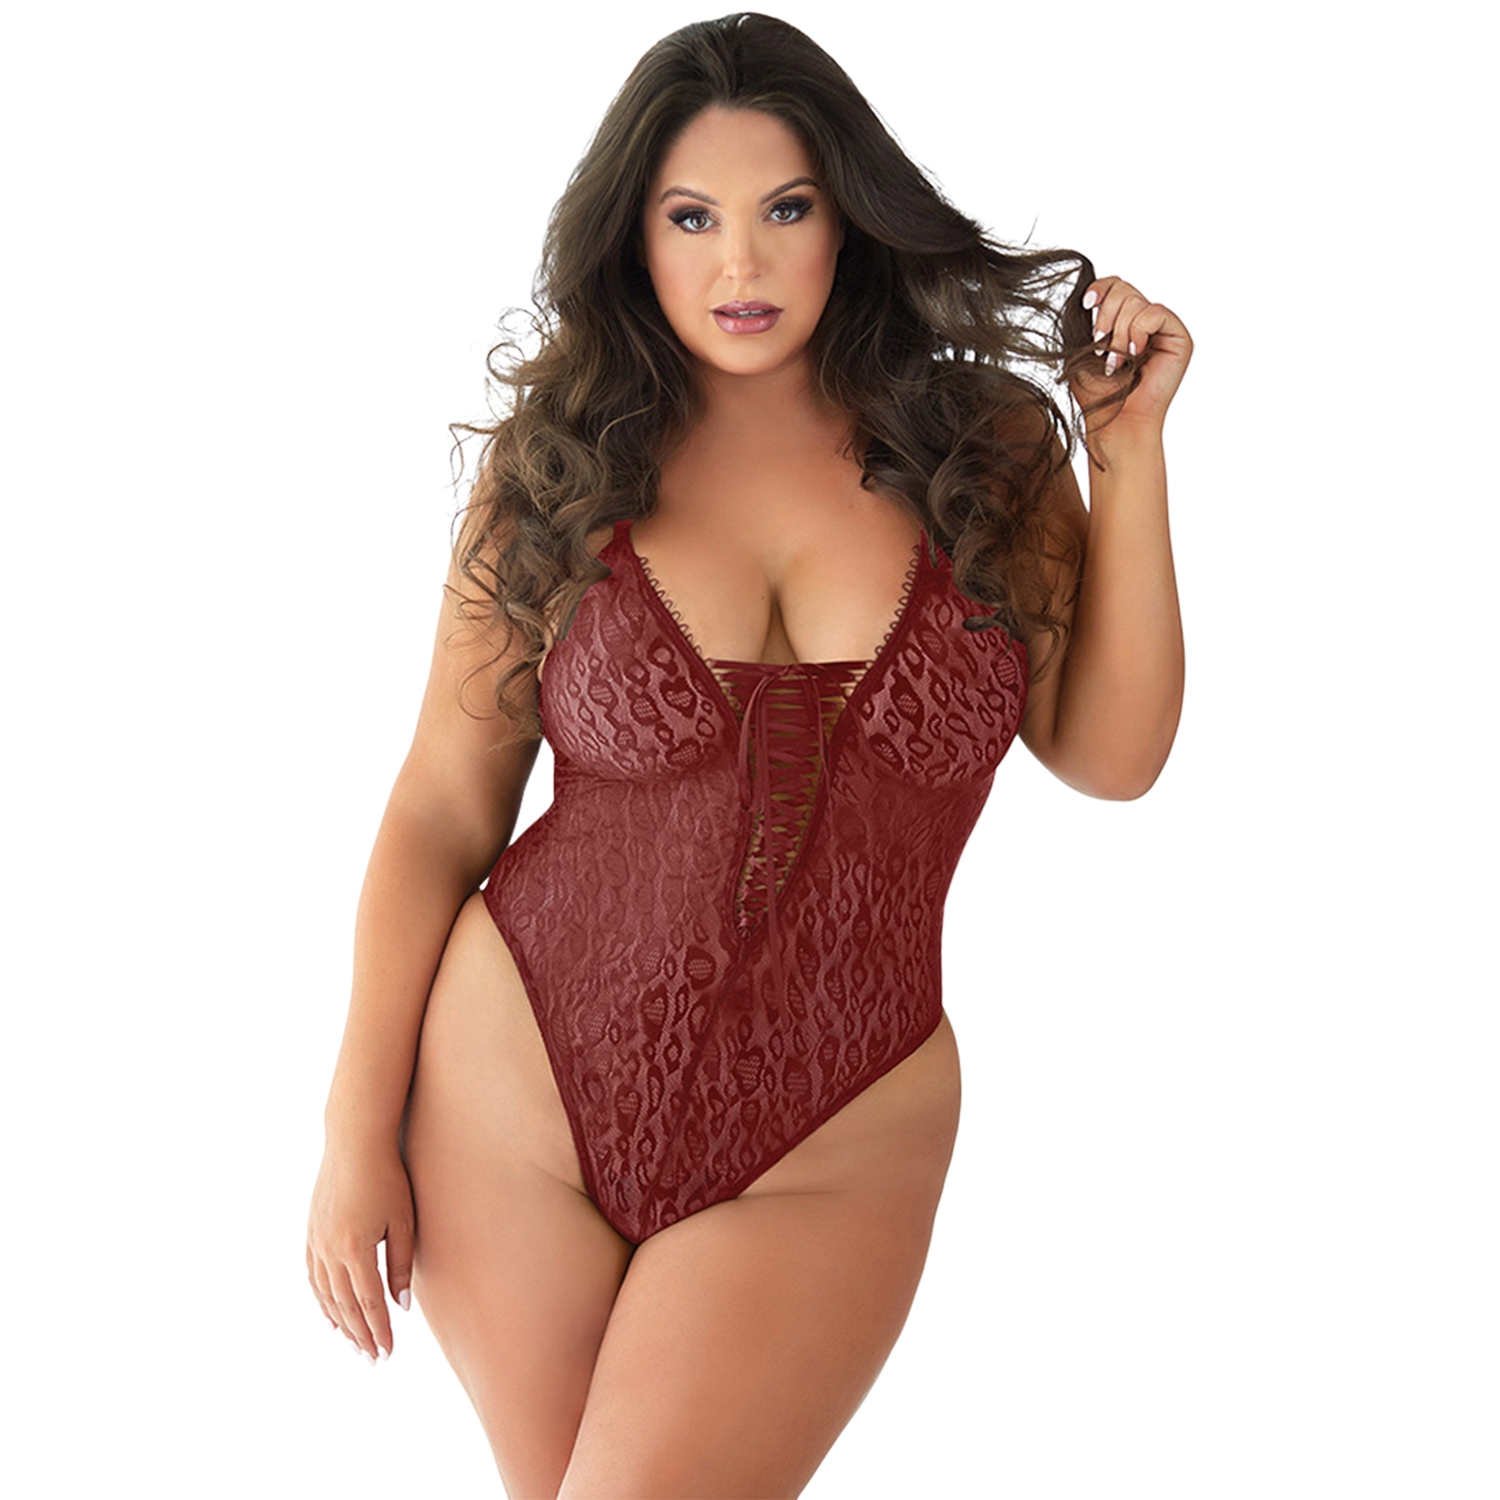 Allure Lingerie Allure Diva Rayna Red Leopard Lace-up Teddy Plus Size - Red - 2XL/3XL